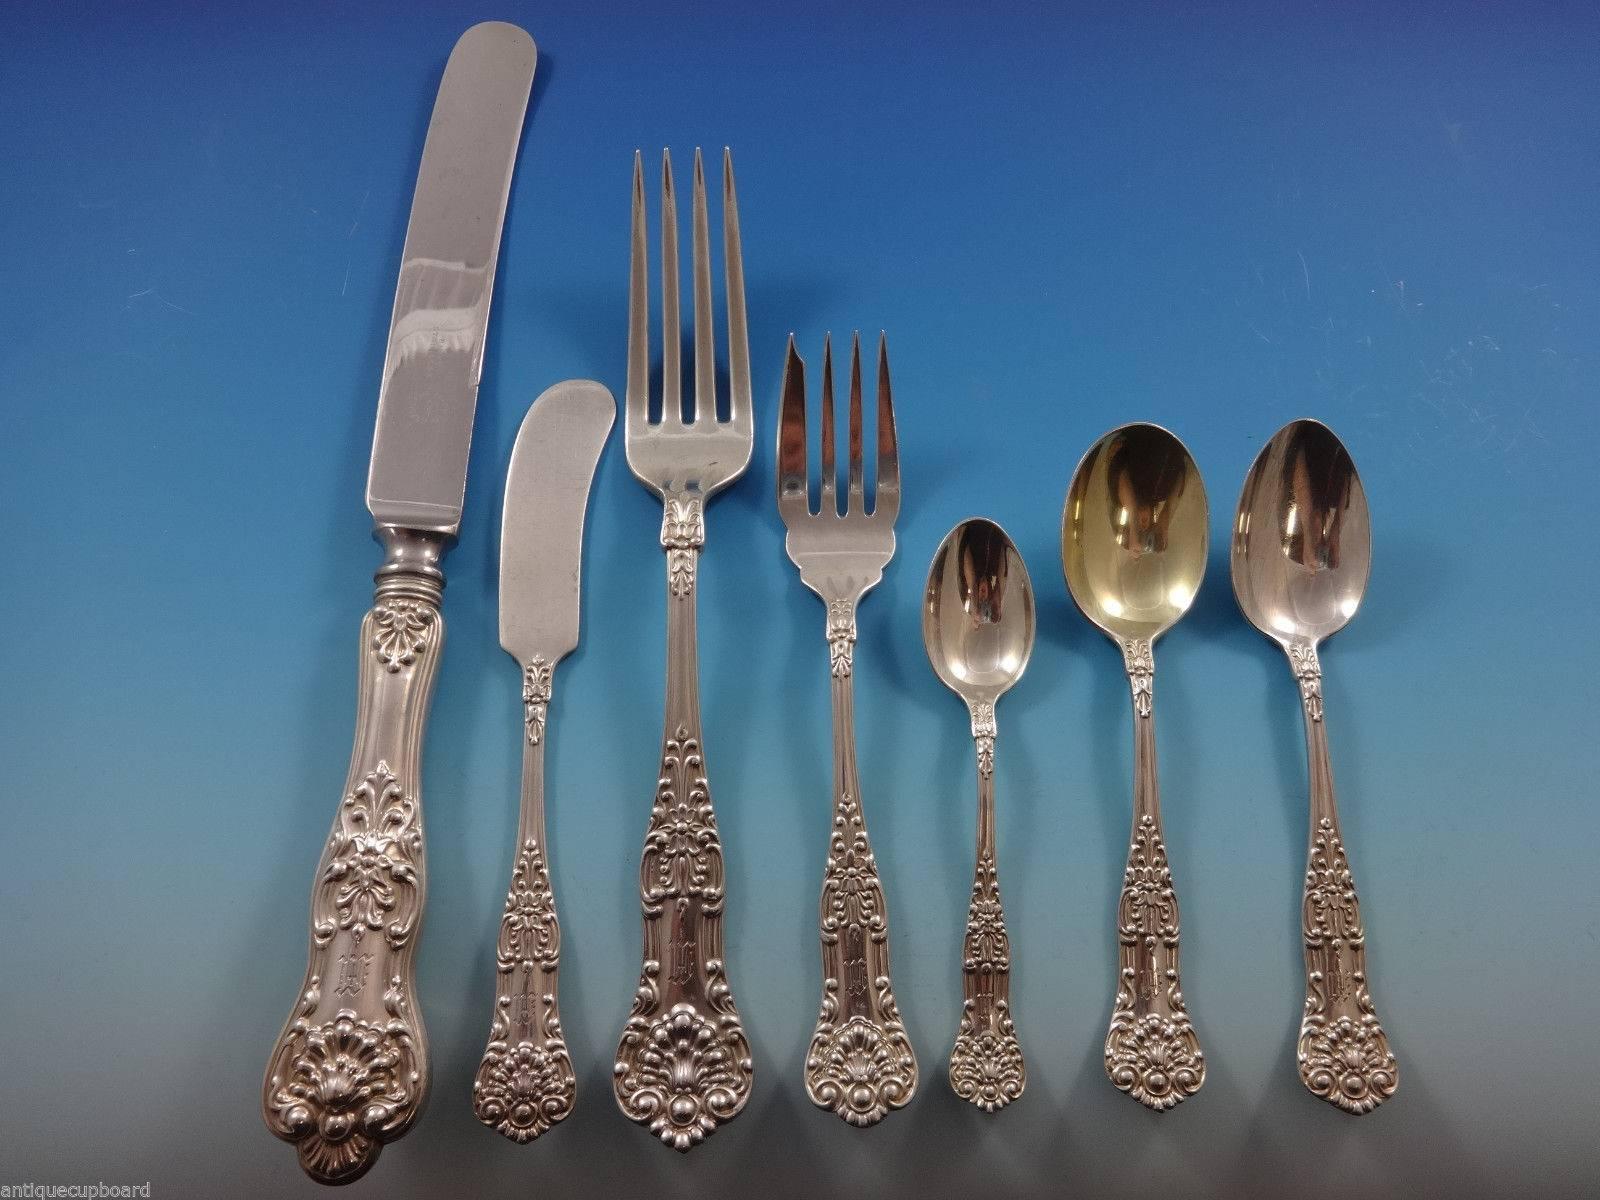 Birks sterling flatware set.

Beautiful Queens by Birks (Canadian) sterling silver flatware set of 65 pieces. This set includes:

Eight dinner size knives, 10